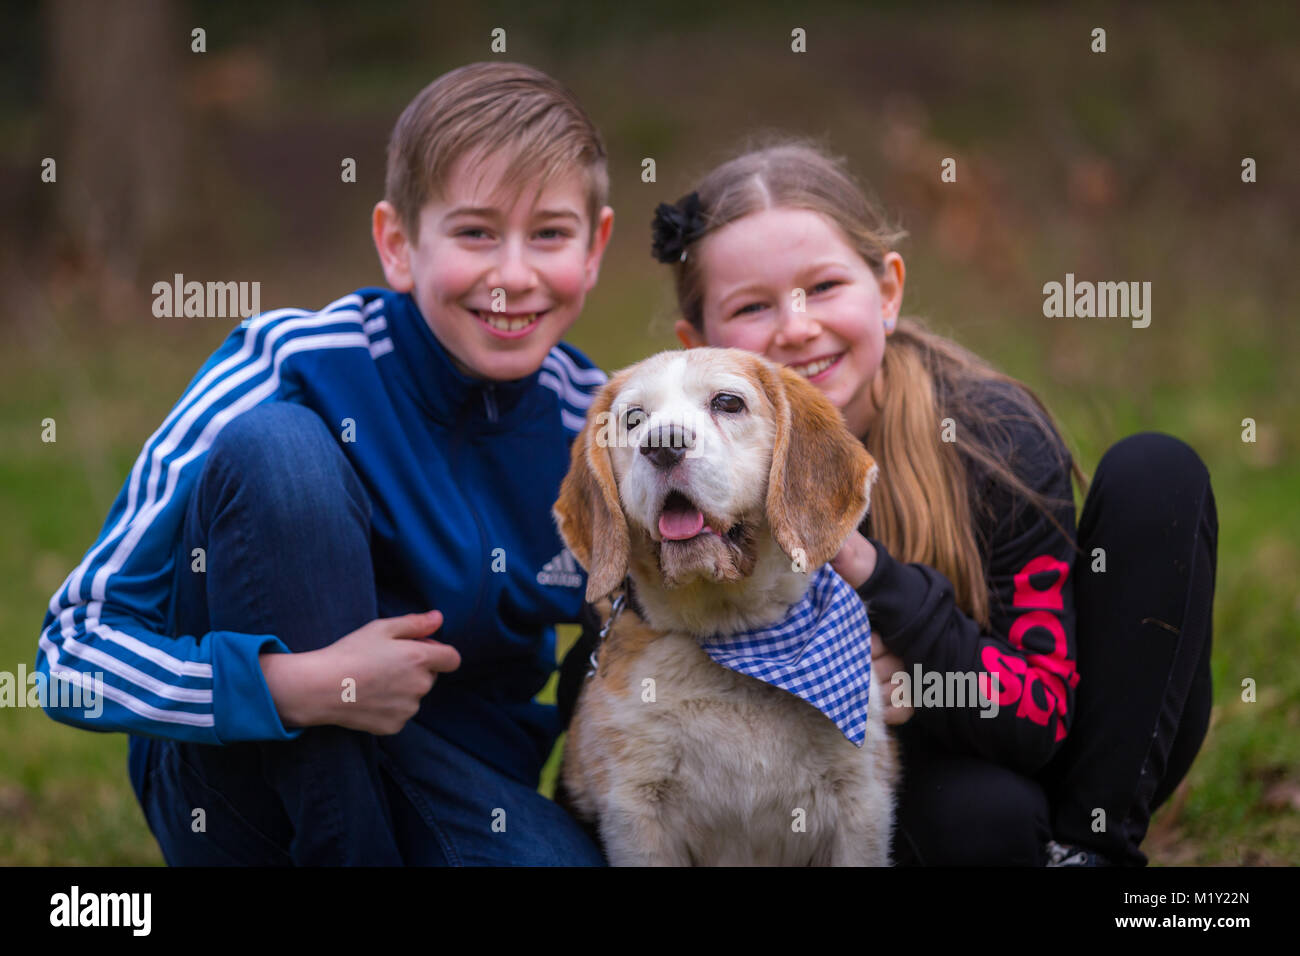 Two children brother and sister with their pet beagle dog in the park Stock Photo